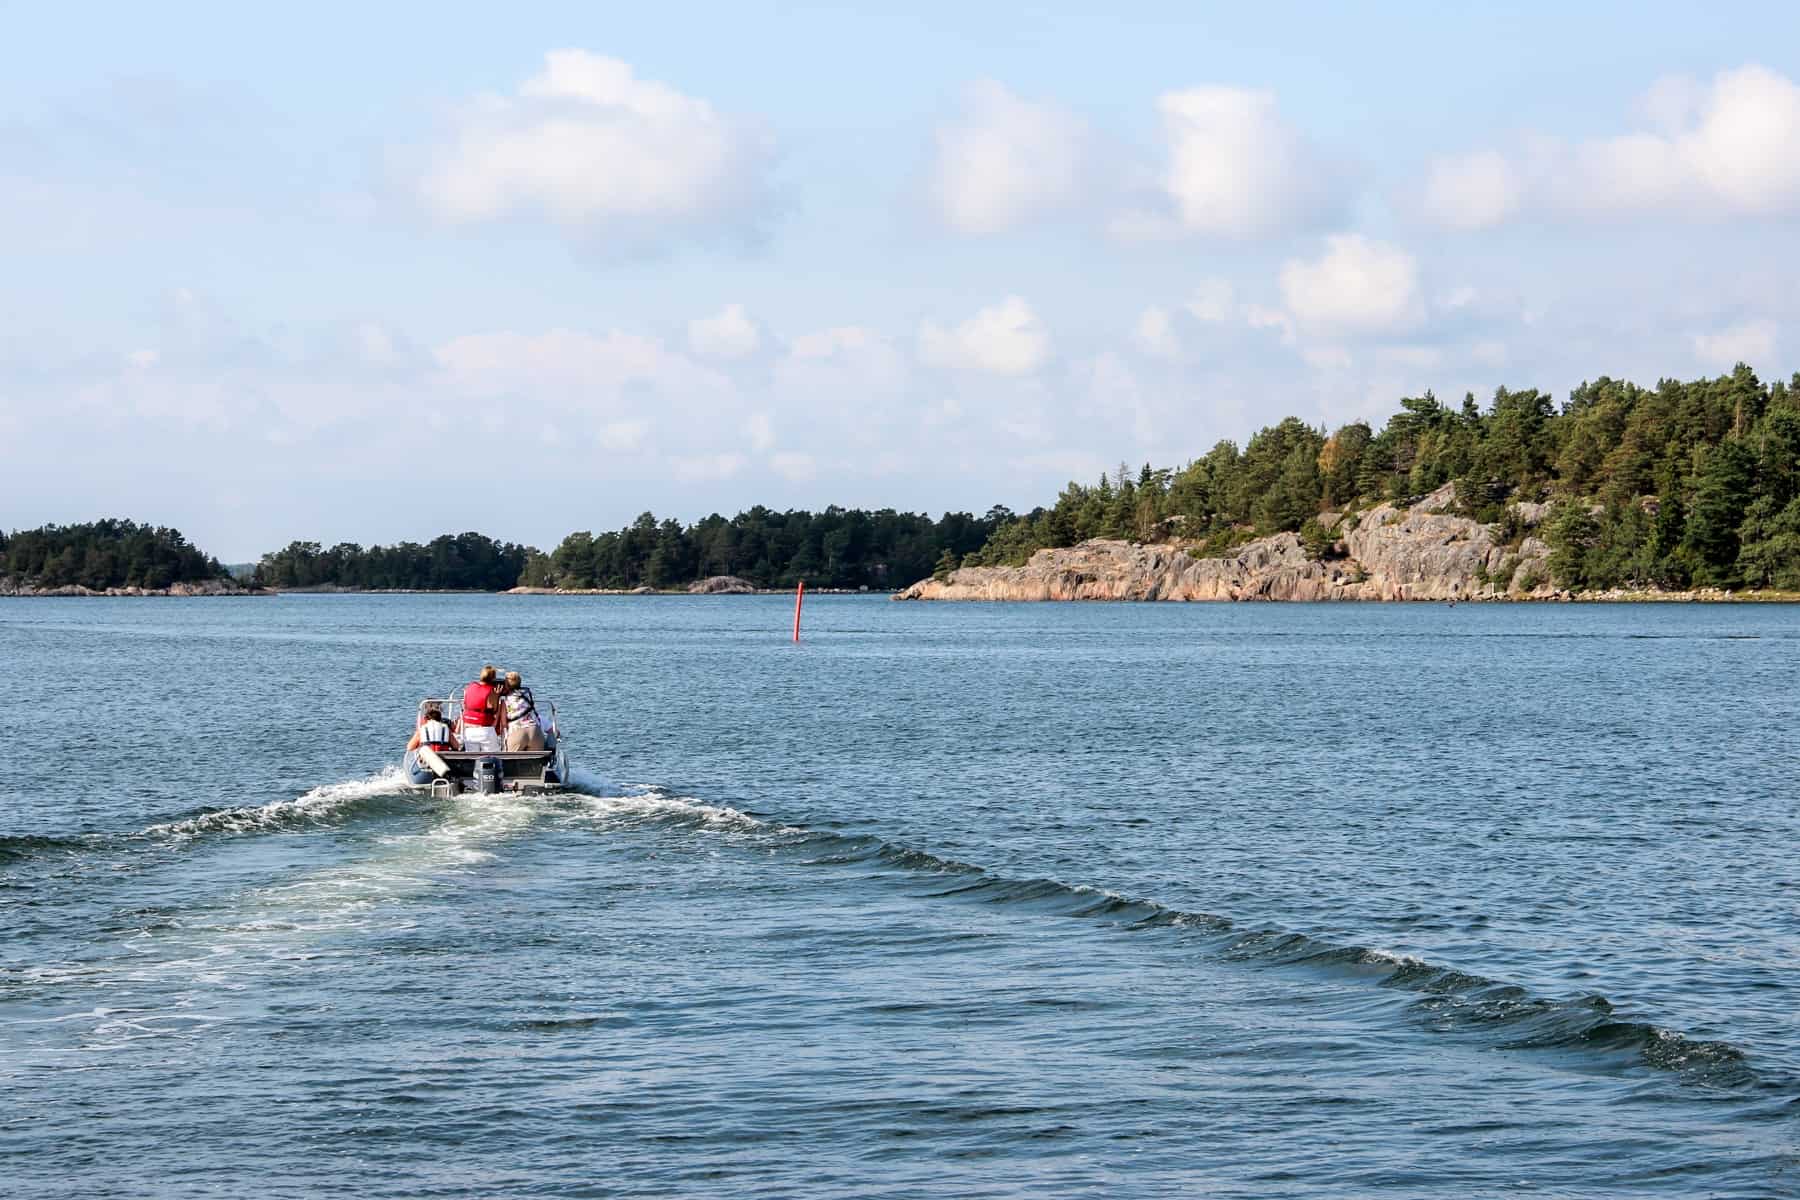 A small motorised boat with four people moves through a wide body of silver-blue water towards low rock formations covered in forest.